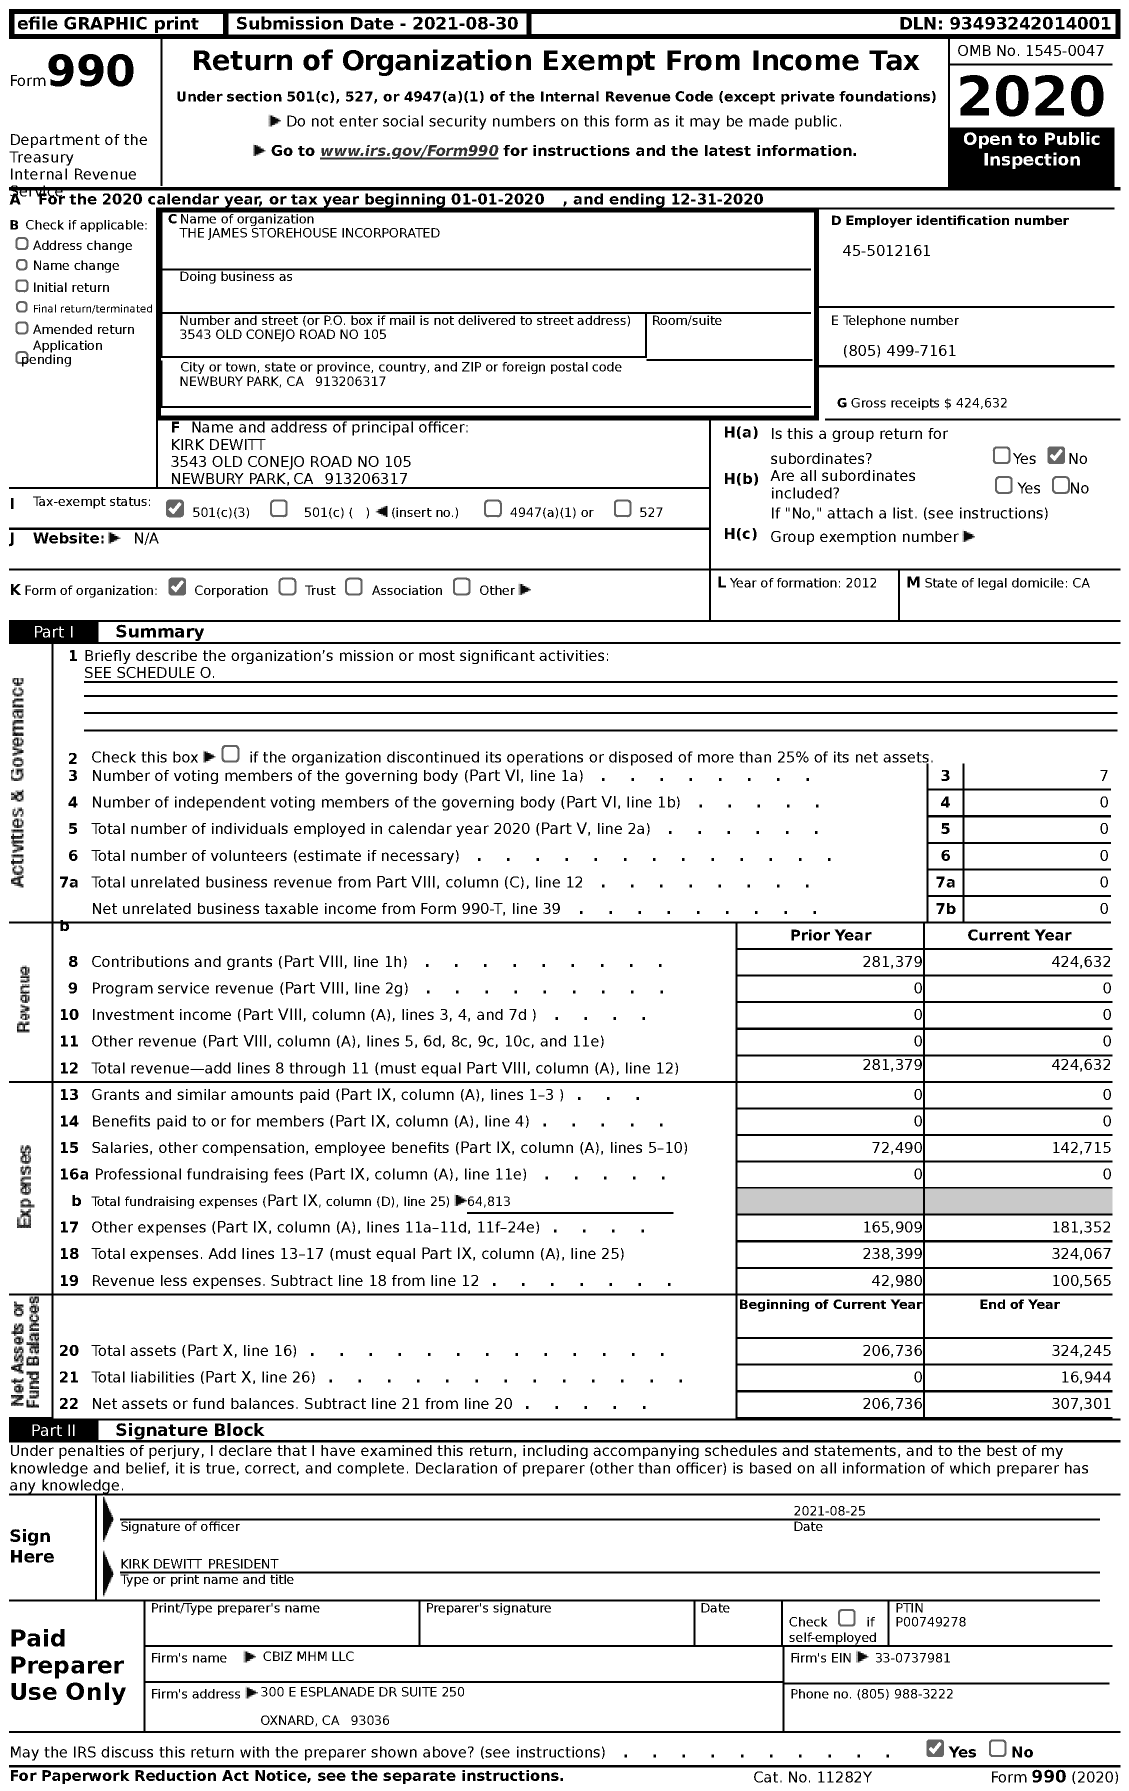 Image of first page of 2020 Form 990 for The James Storehouse Incorporated